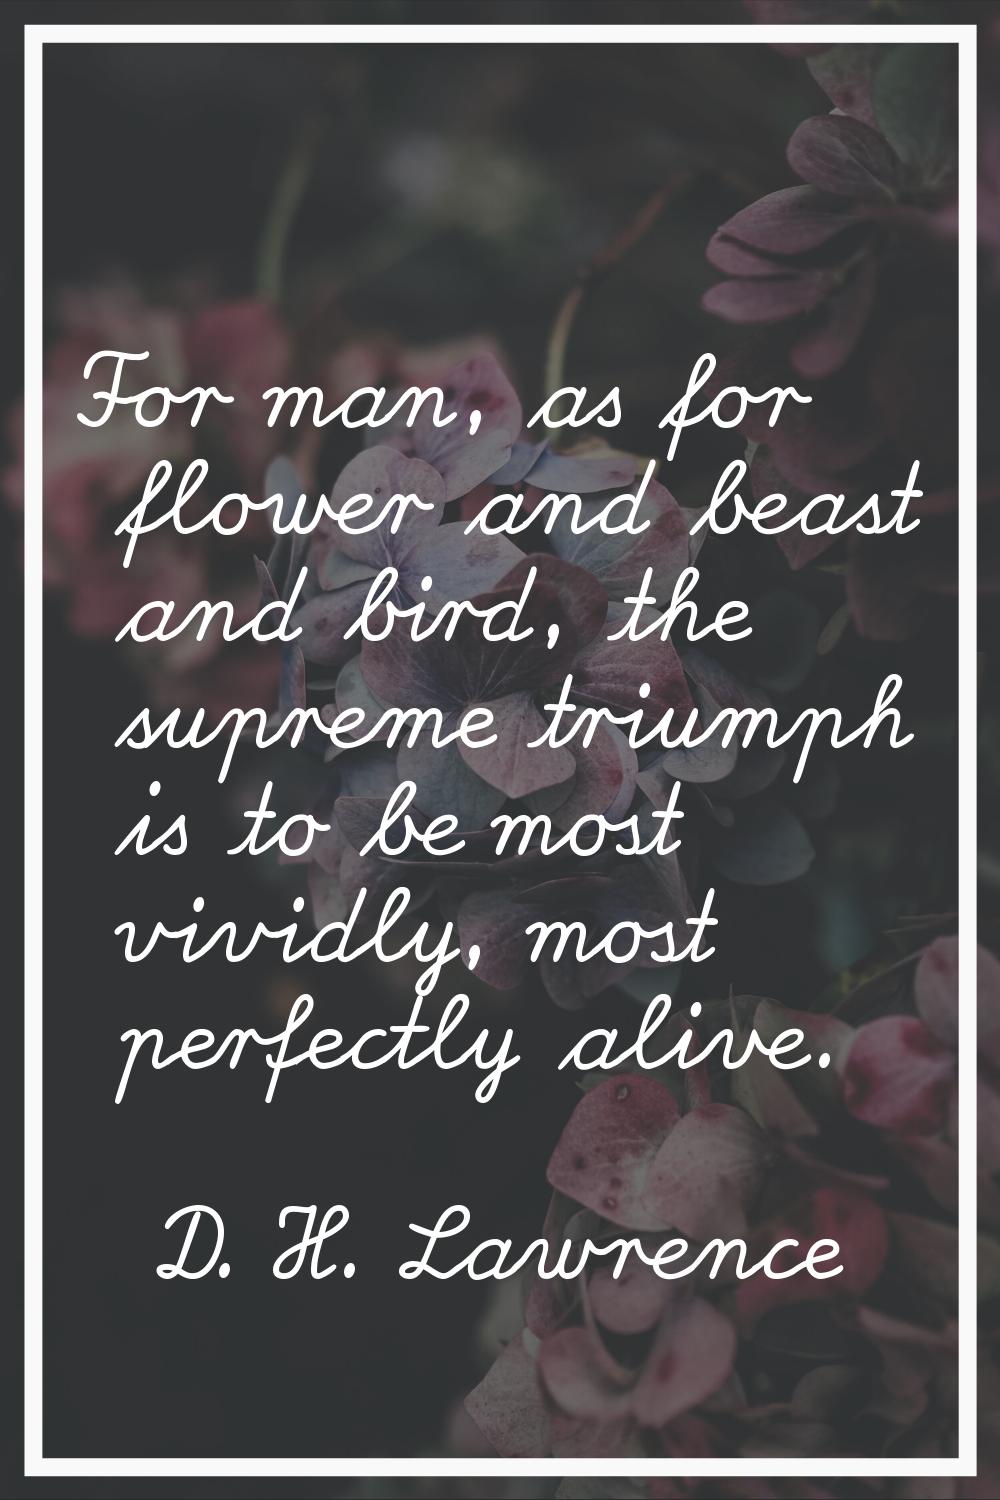 For man, as for flower and beast and bird, the supreme triumph is to be most vividly, most perfectl